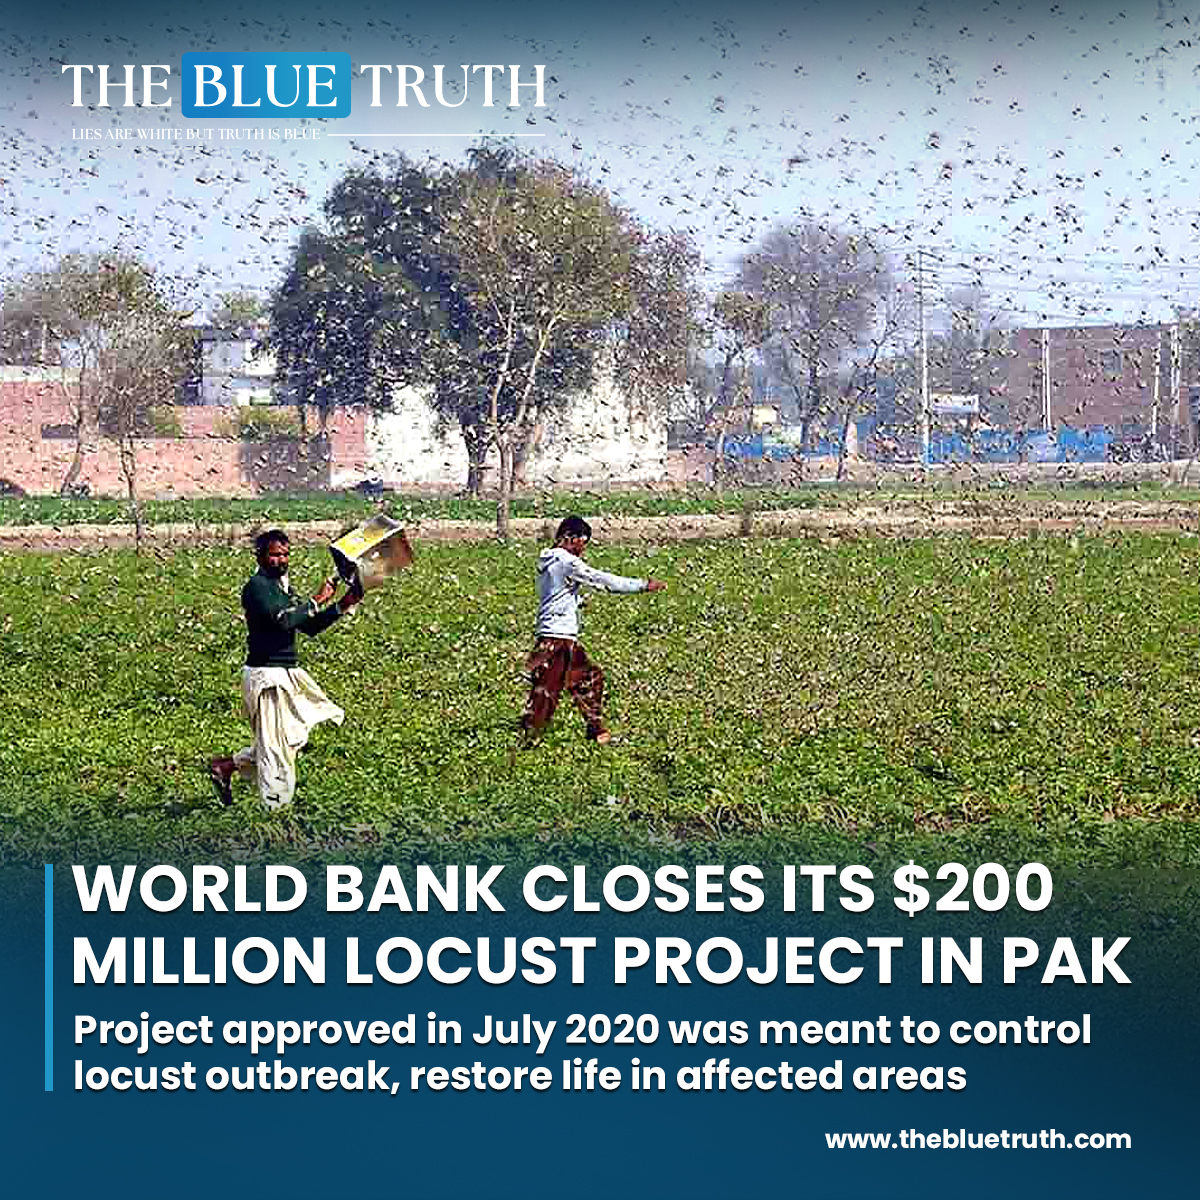 The World Bank has closed its locust emergency and food security (Leaf) project, for which it had approved $200 million.
#WorldBankProject #LocustControl #AgriculturalSupport #EconomicDevelopment
#InternationalAid #EconomicRecovery #tbt #TheBlueTruth